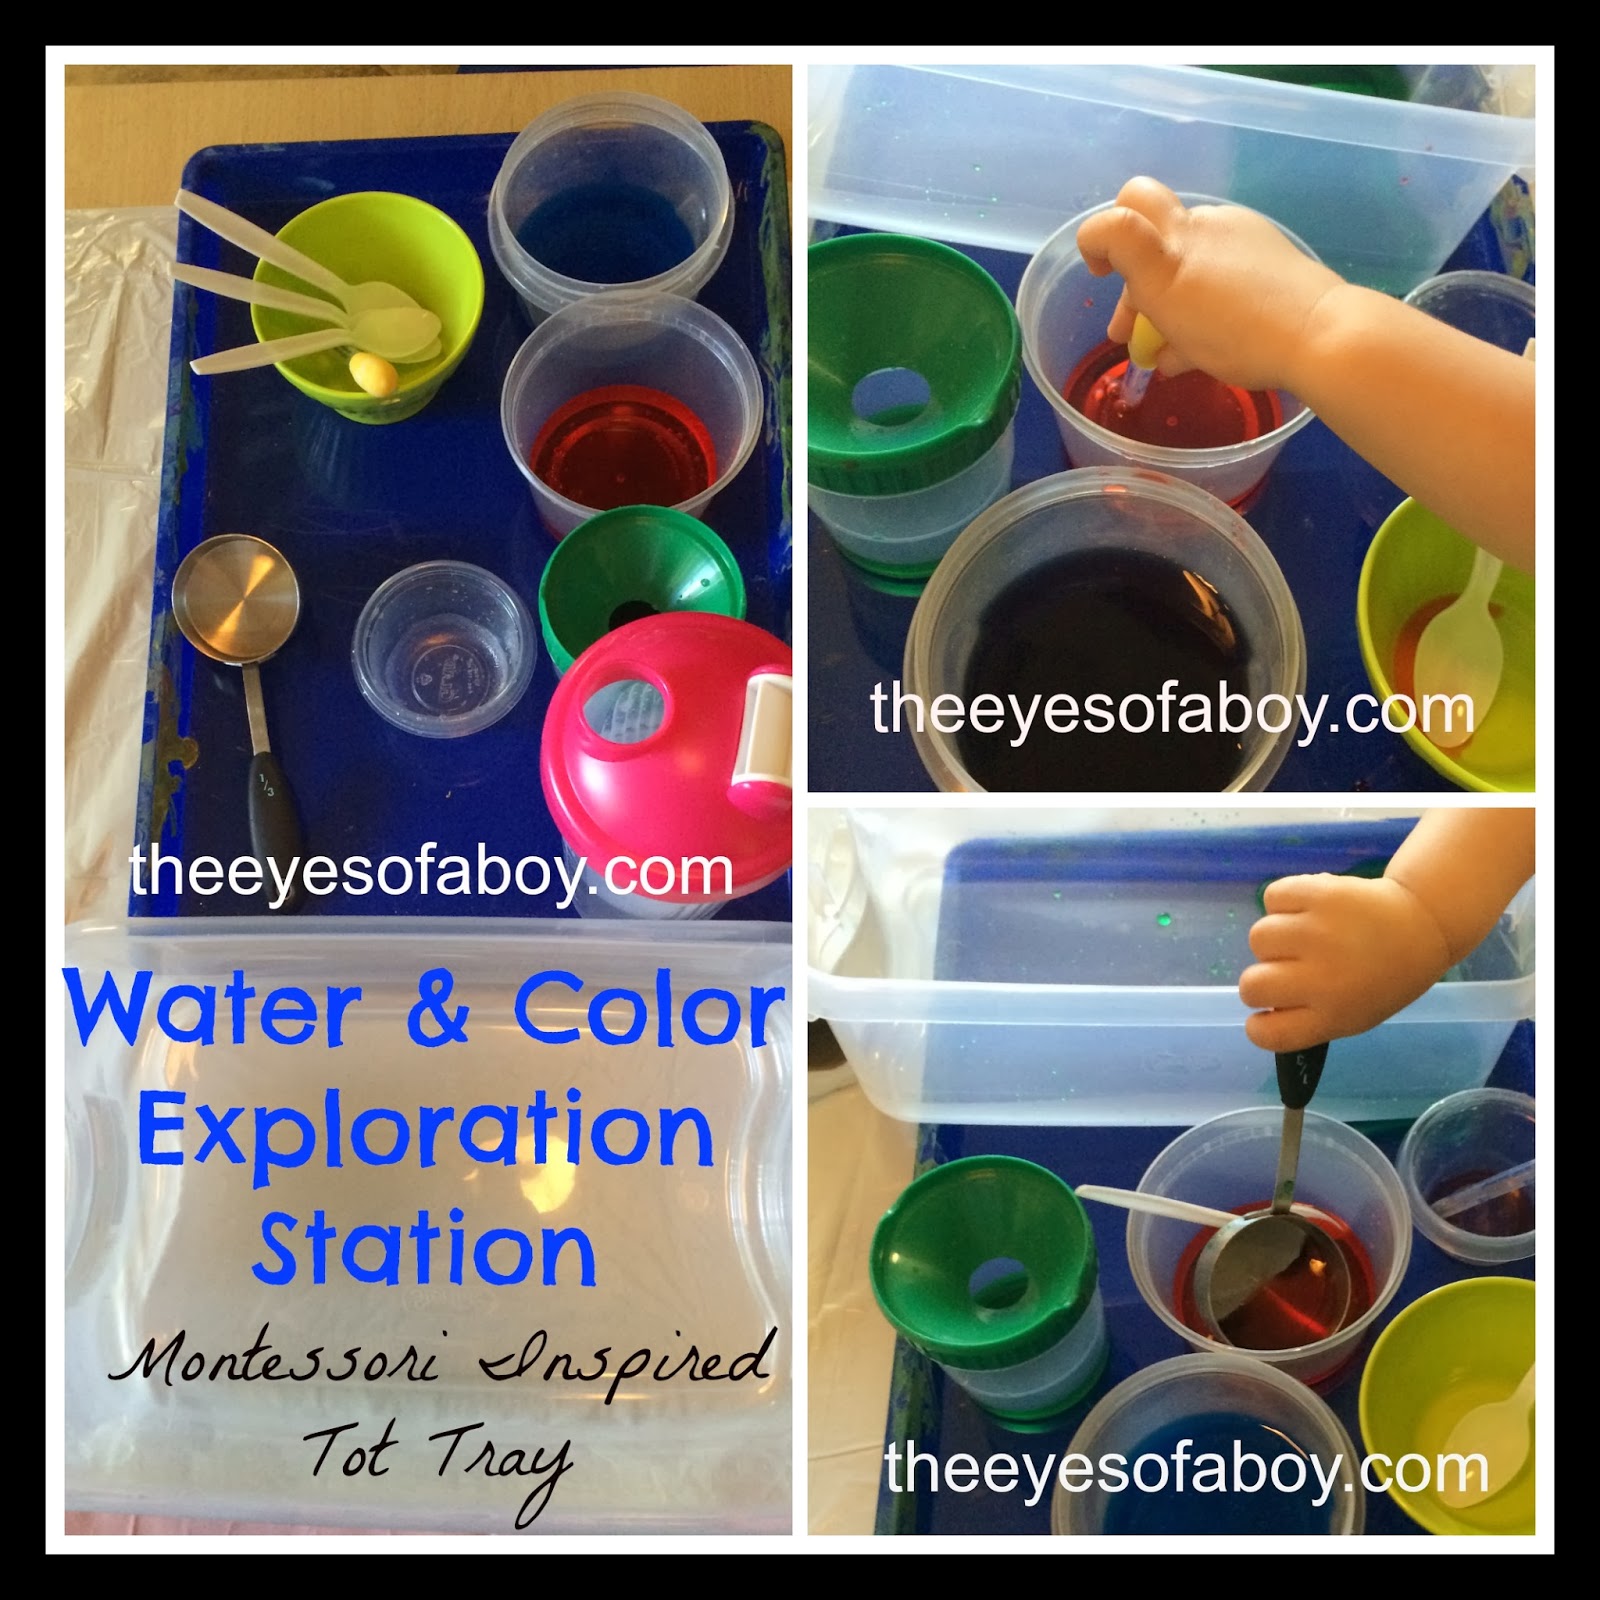 Water and Color Exploration Station - water sensory tray for toddlers and kids - Montessori inspired